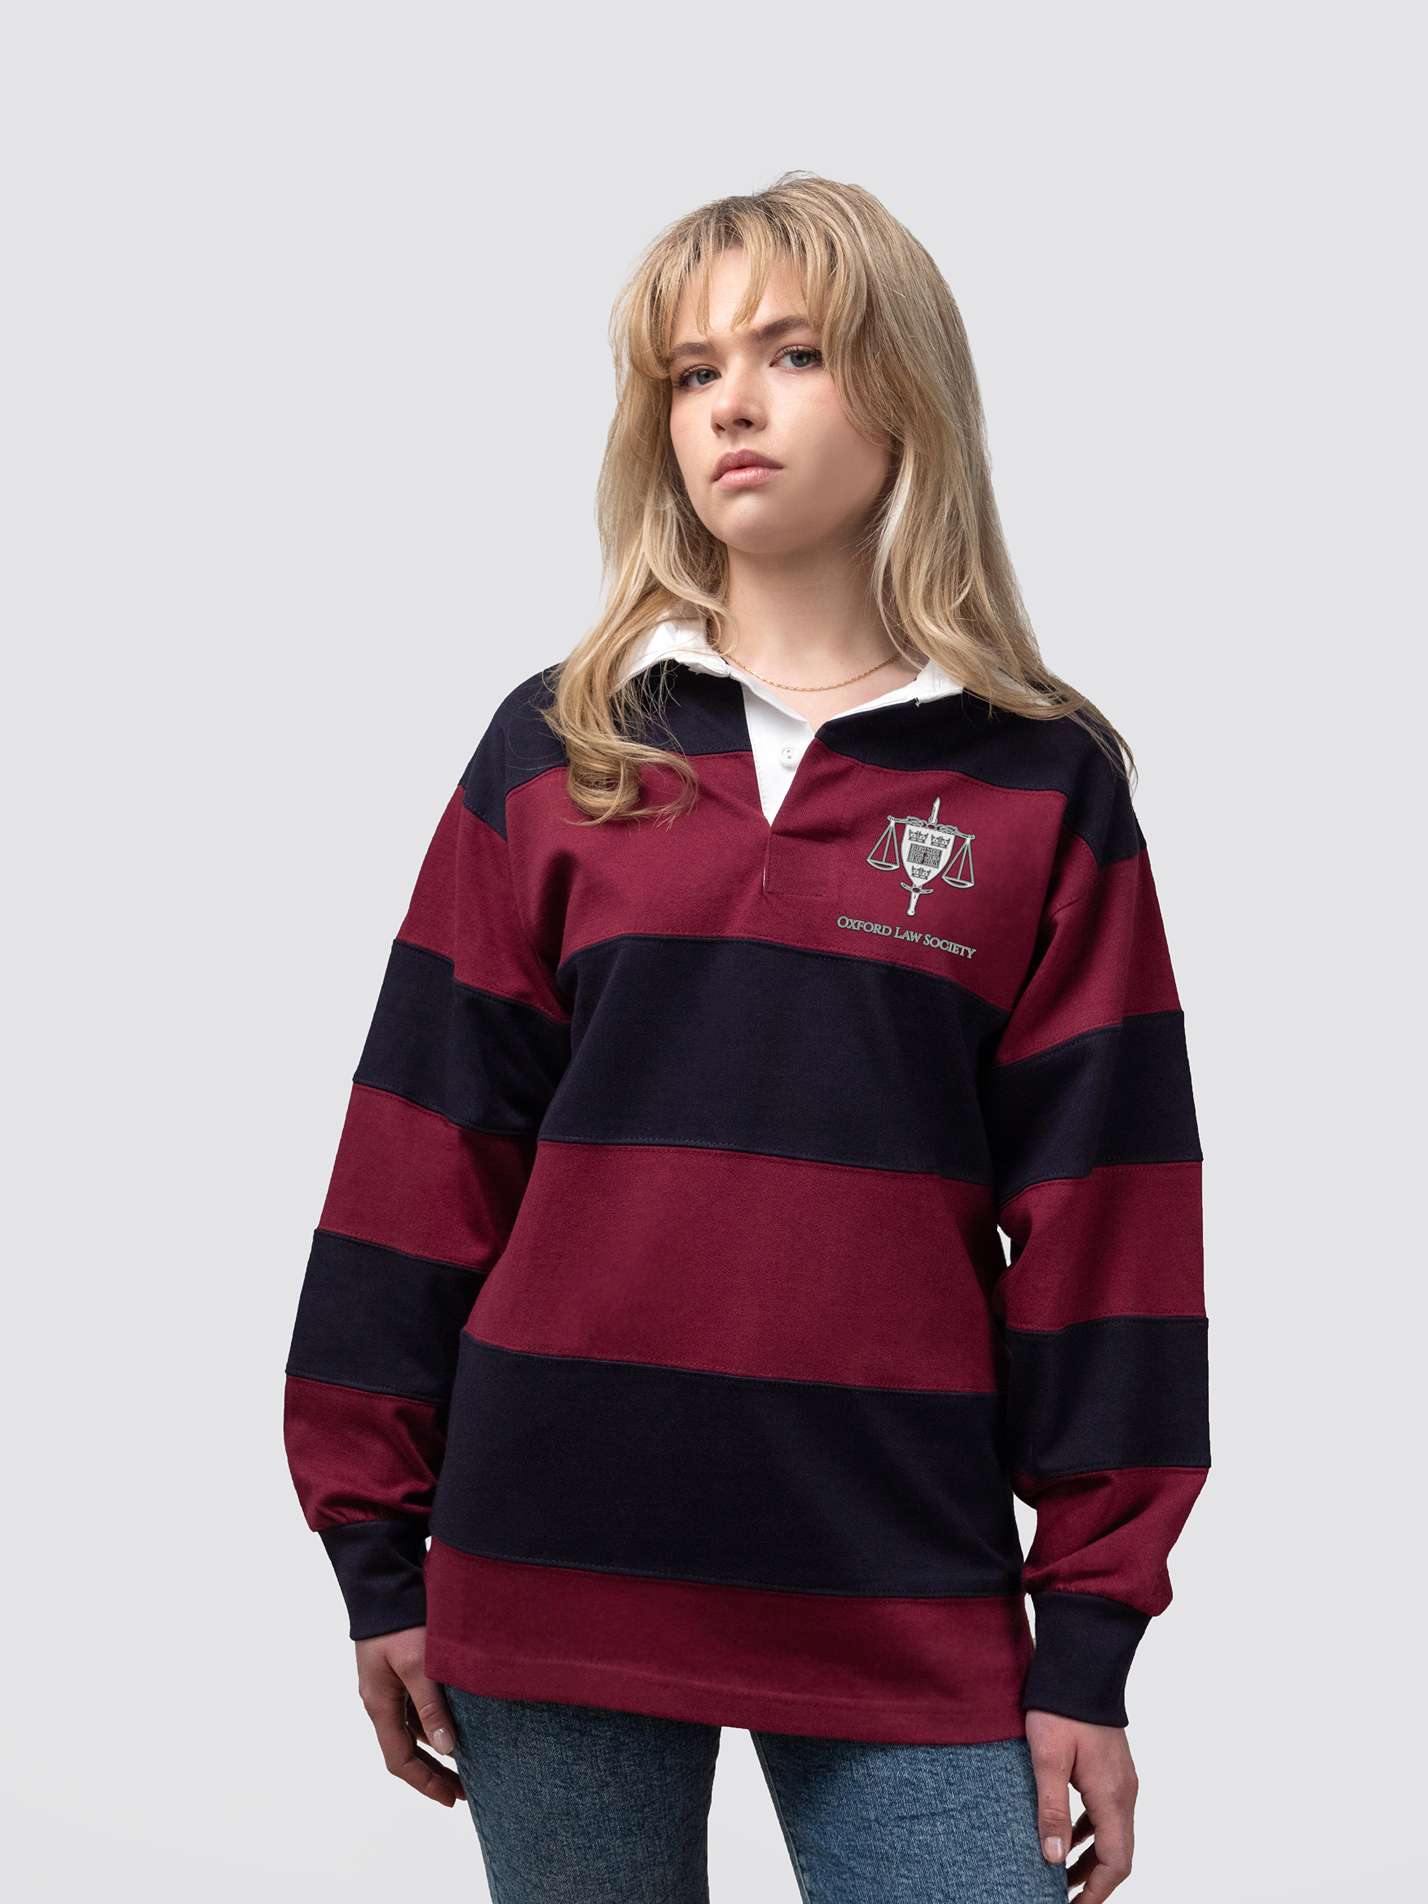 Oxford Law Society Unisex Striped Rugby Shirt